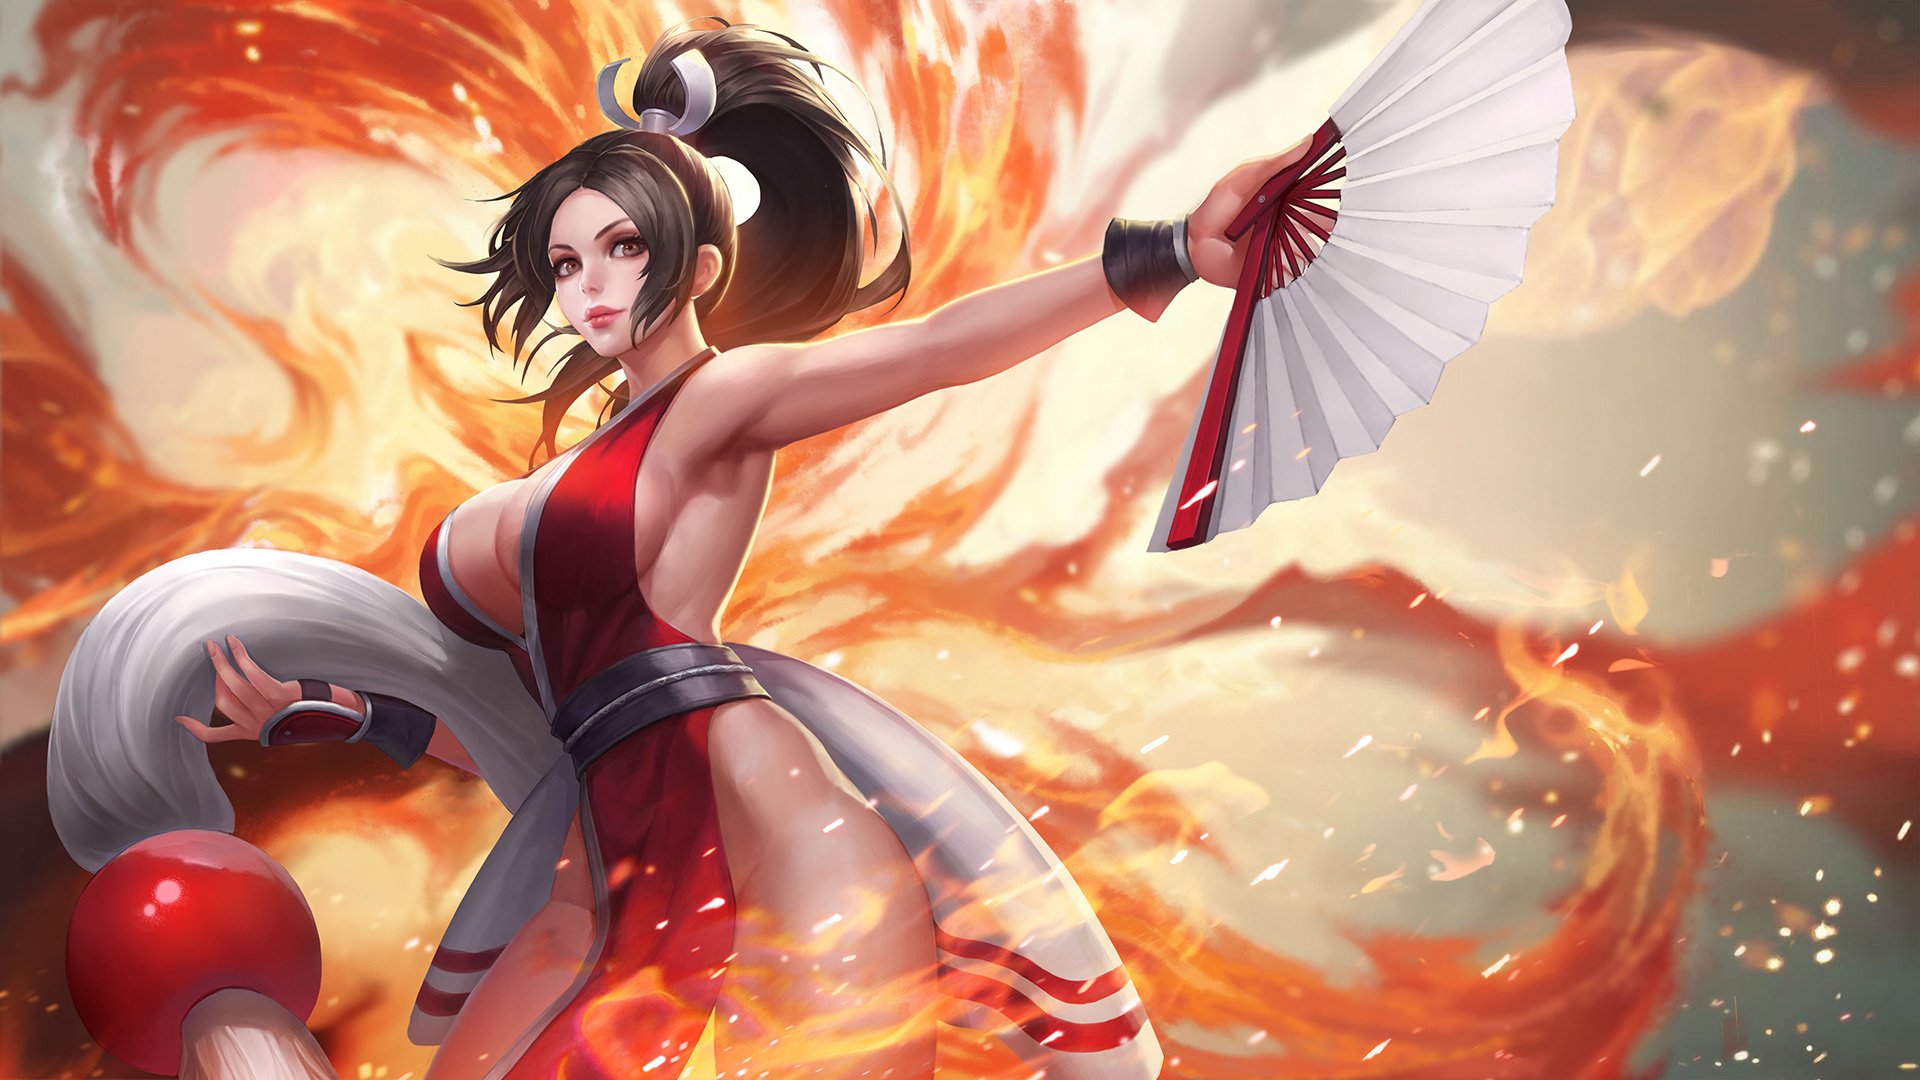 King of Glory Mai Shiranui Dancing with fan formidable weapon made steel spokes top and bottom rigid and sharp as a razor HD Wallpaper for Desktop